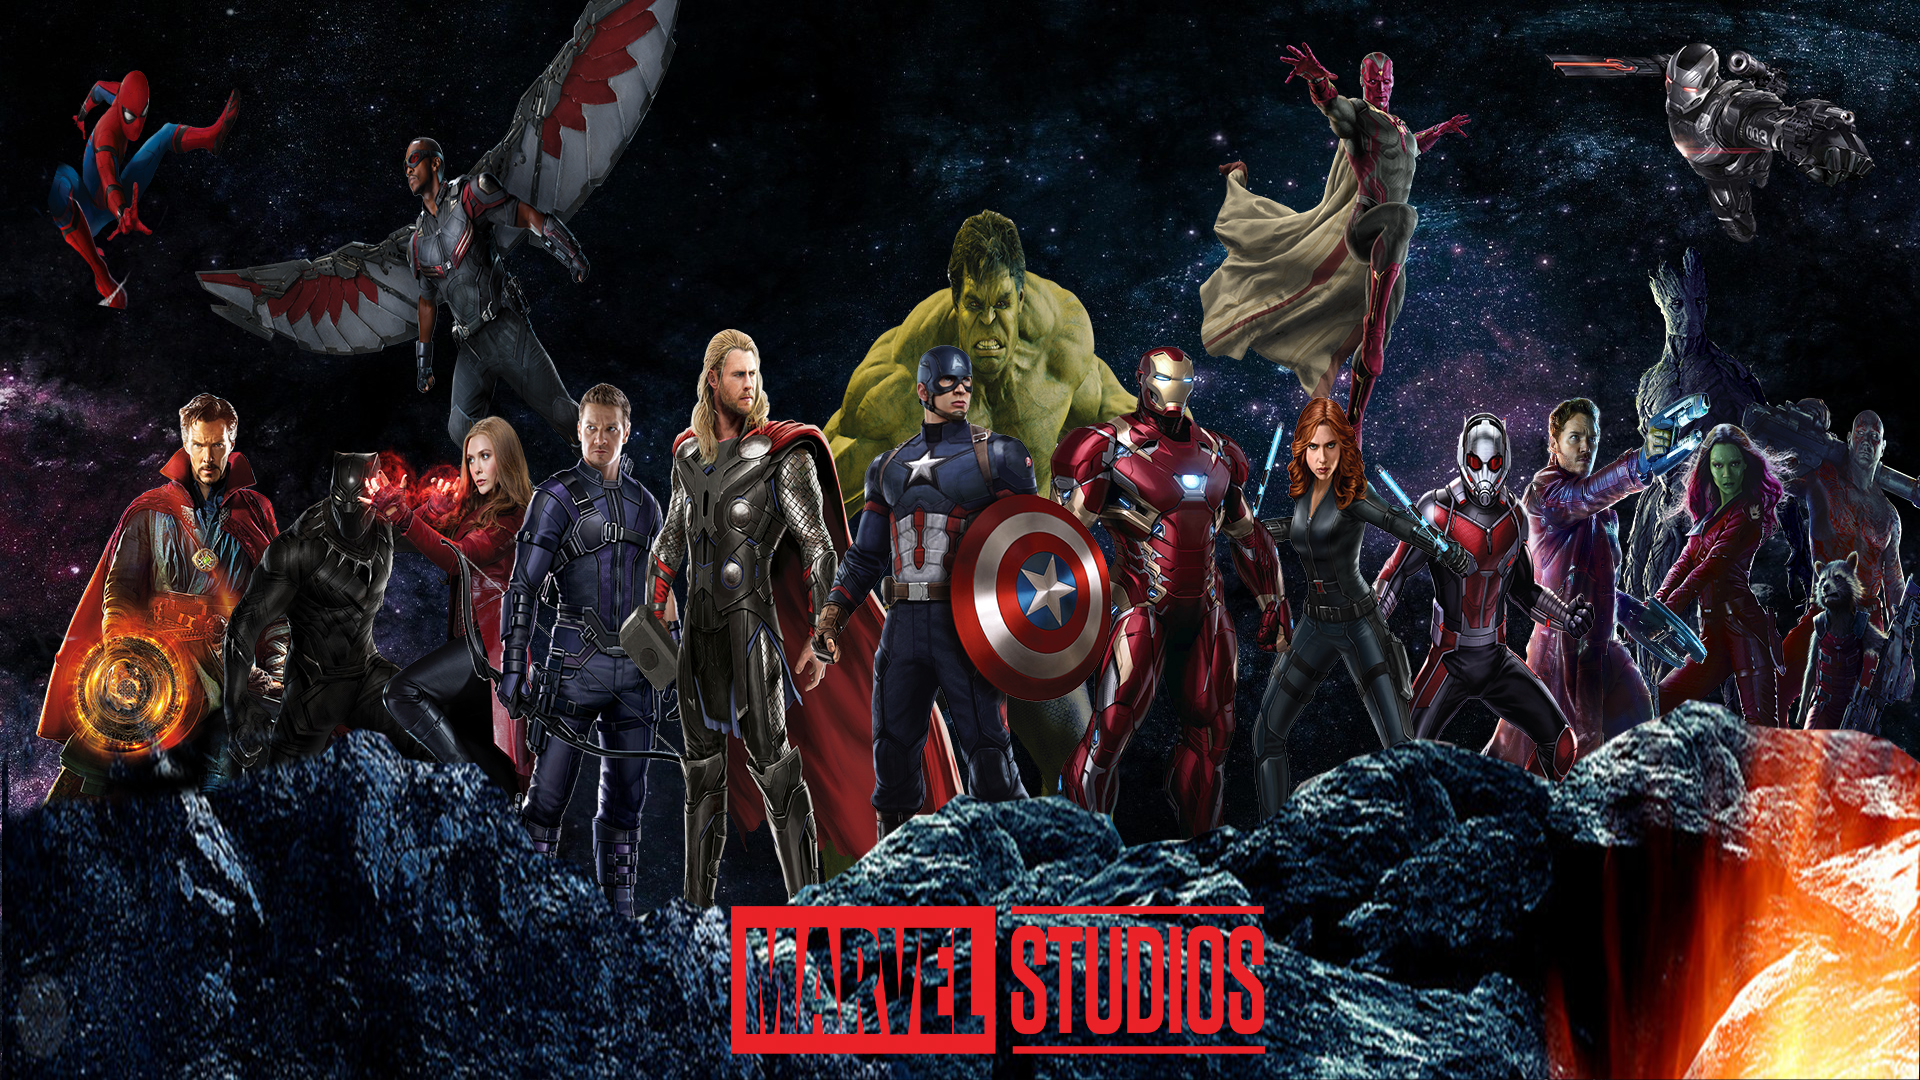 Marvel Cinematic Universe Wallpaper By Thekingblader995